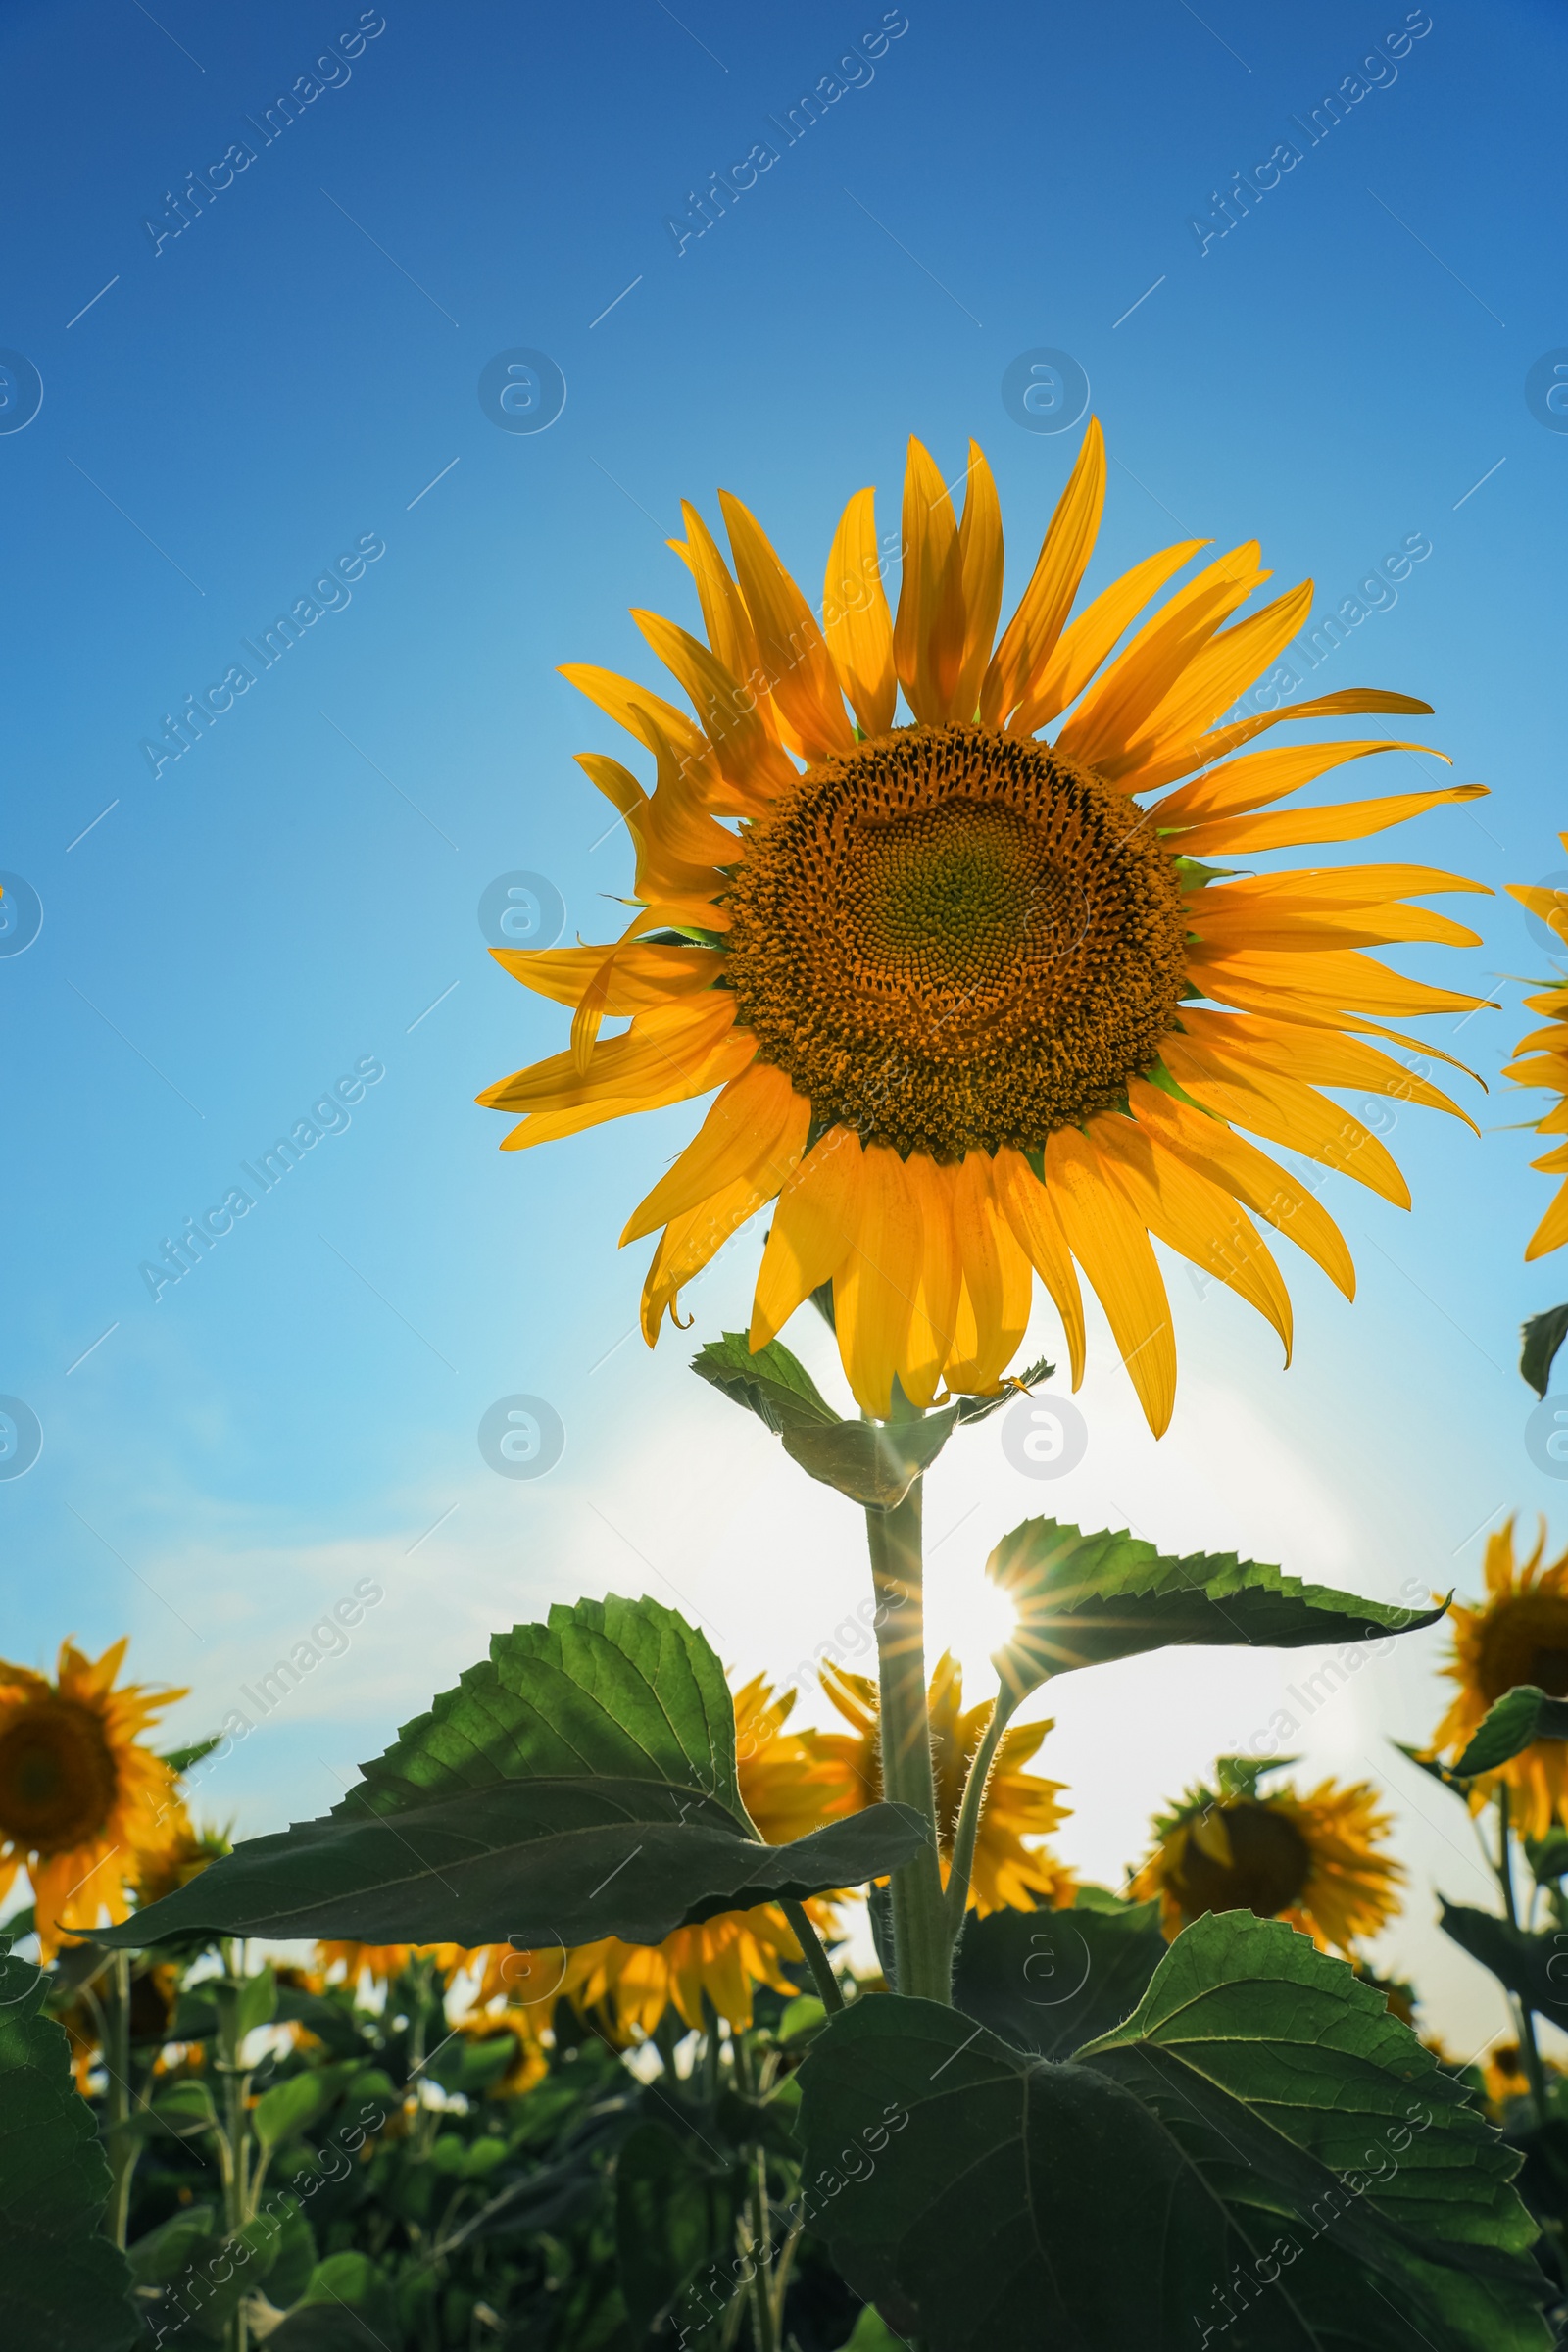 Photo of Sunflower growing in field outdoors on sunny day